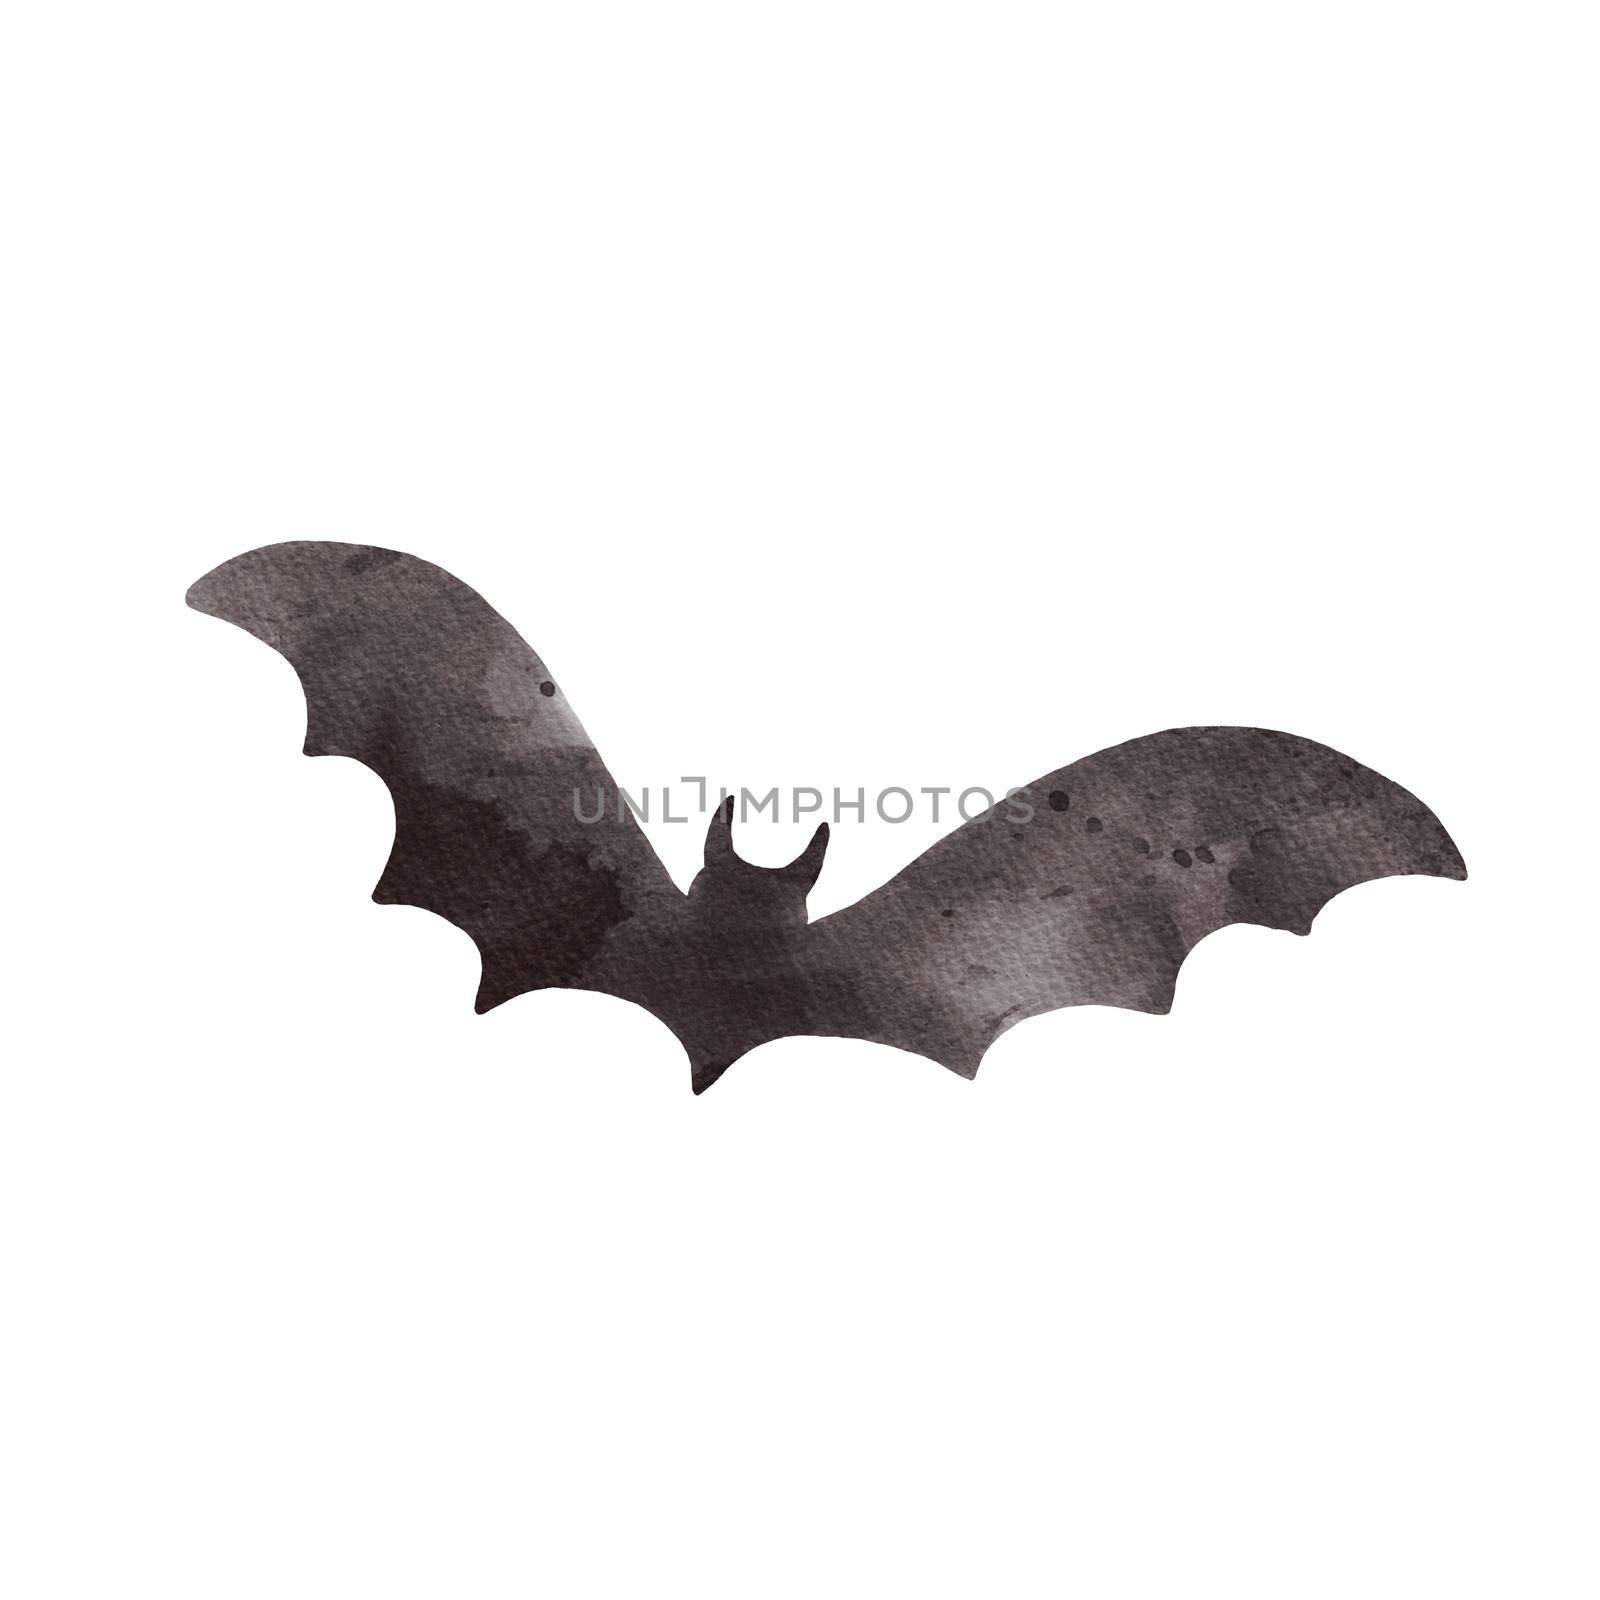 Black bat watercolor for Halloween isolated on white background. Scary illustration by ElenaPlatova